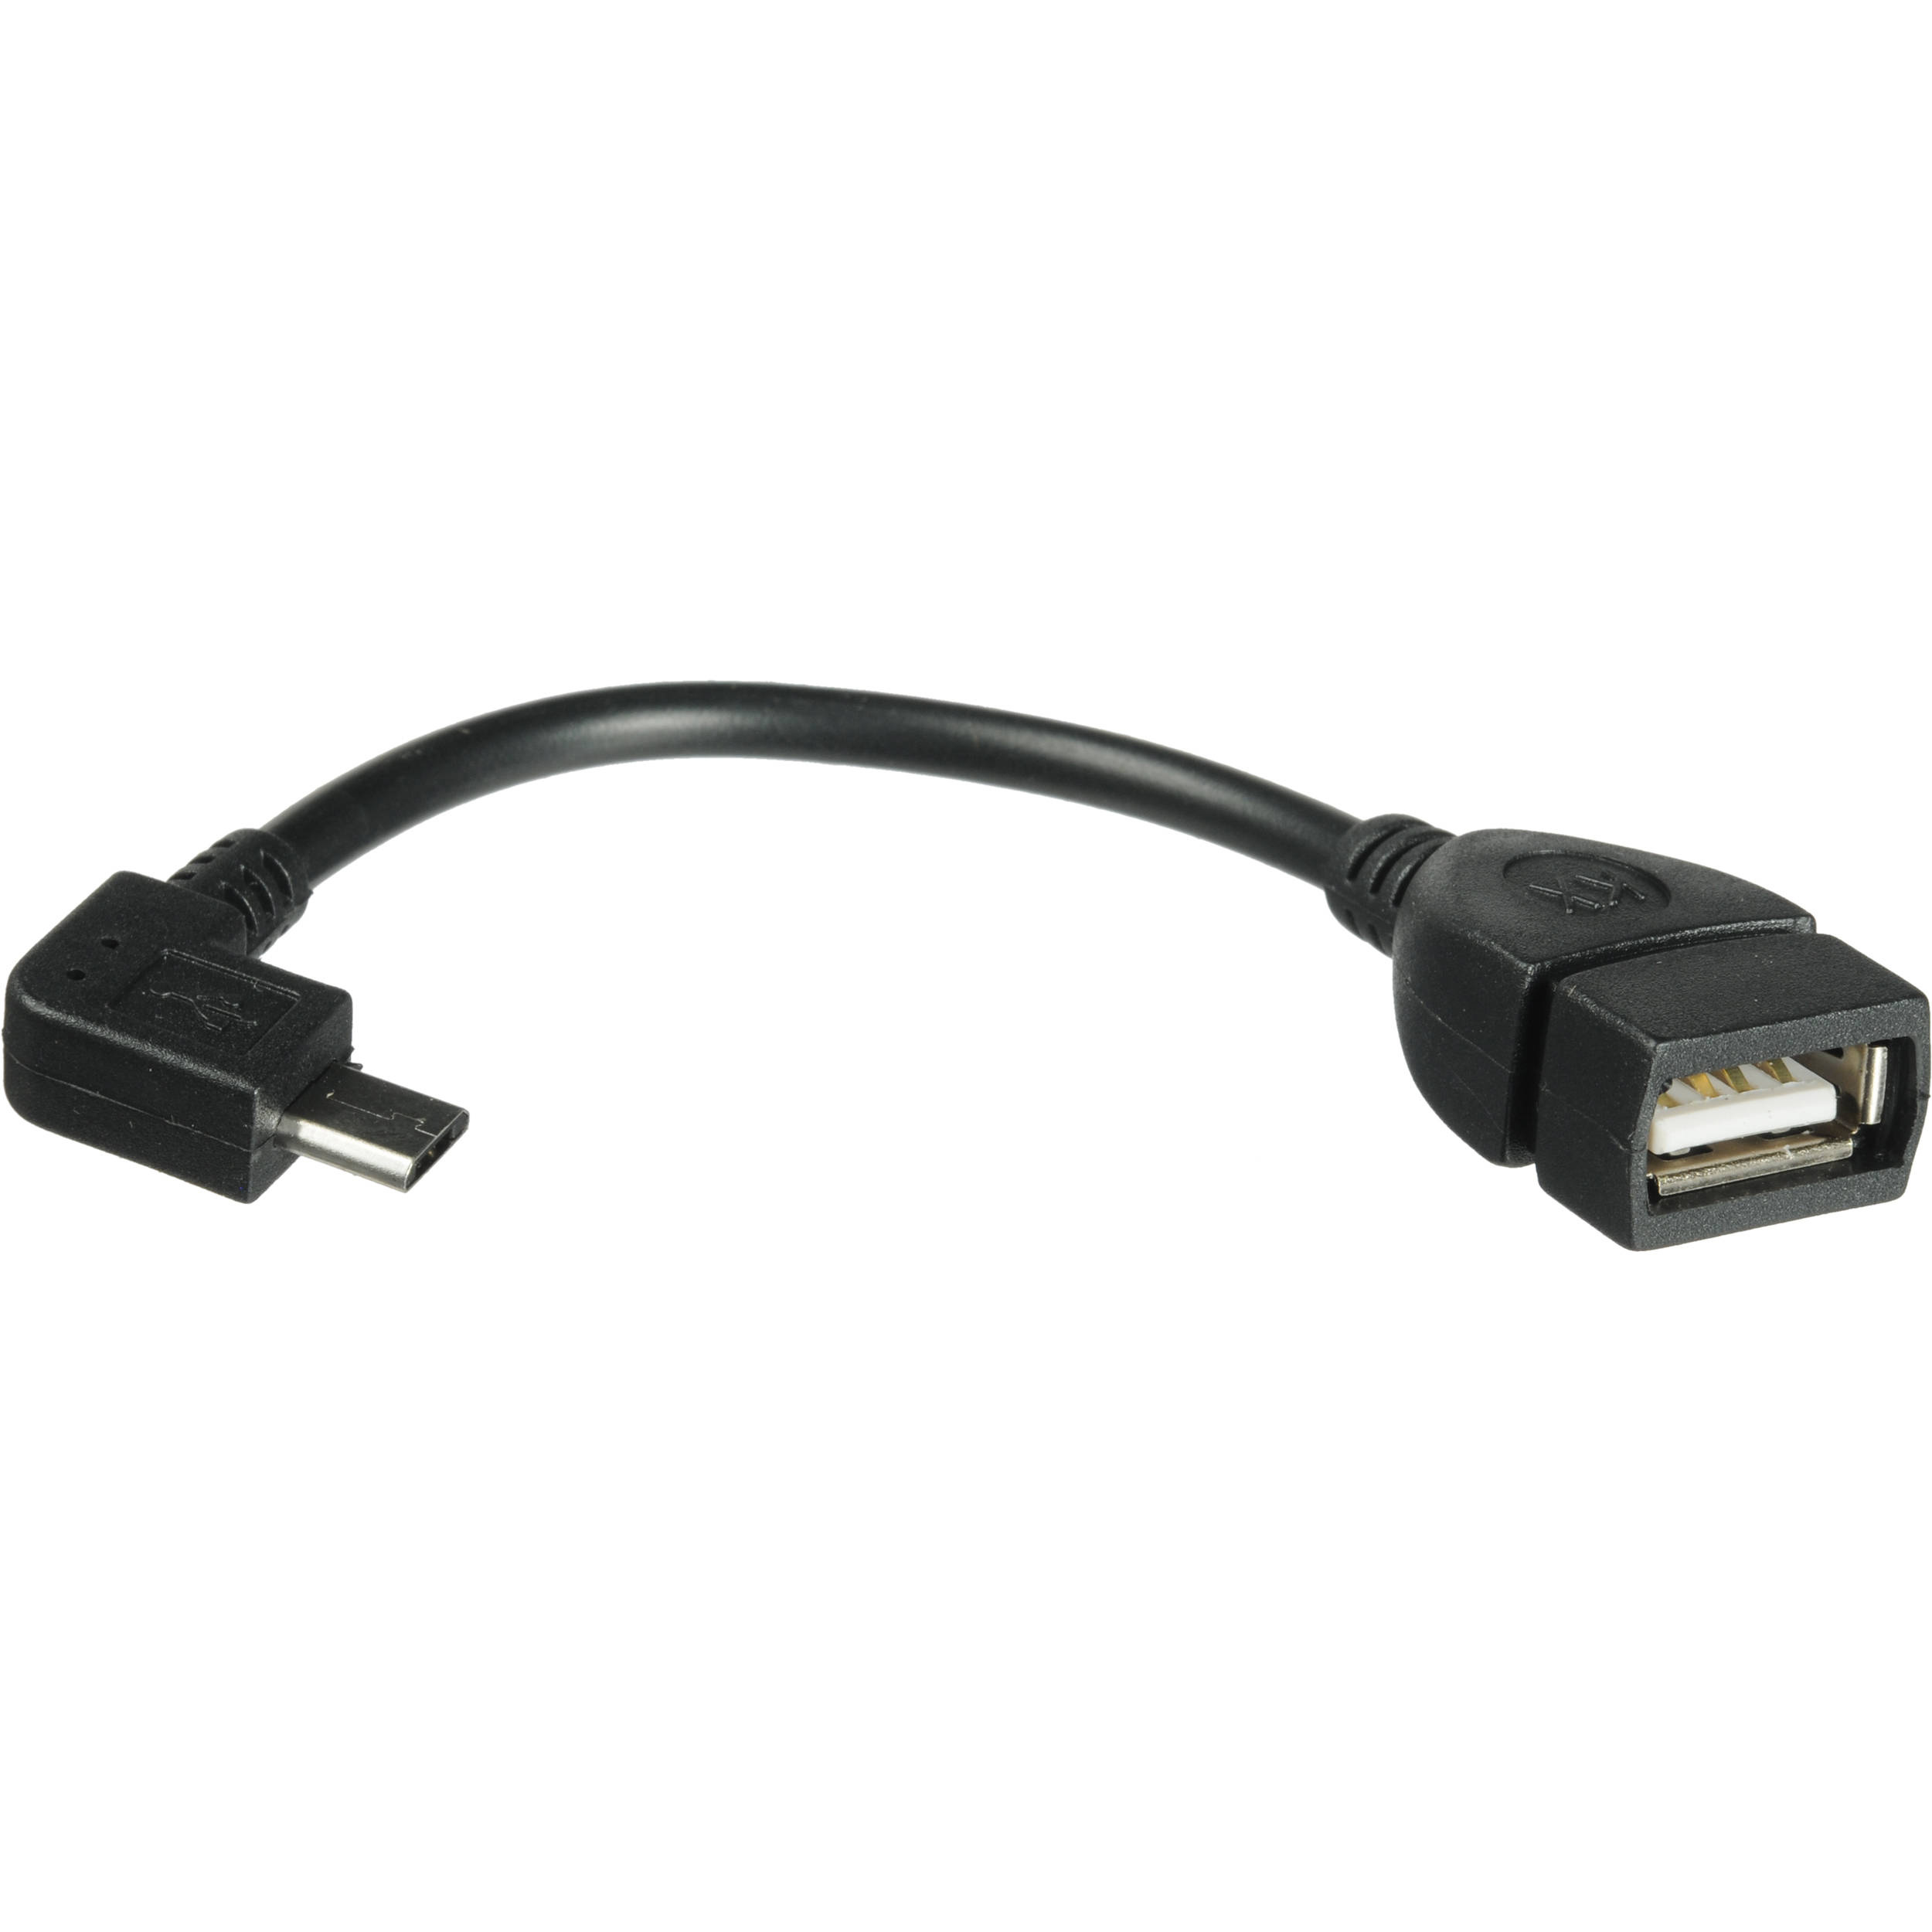 Comprehensive On-The-Go USB A Female to Micro USB B Male Adapter Cable (4")